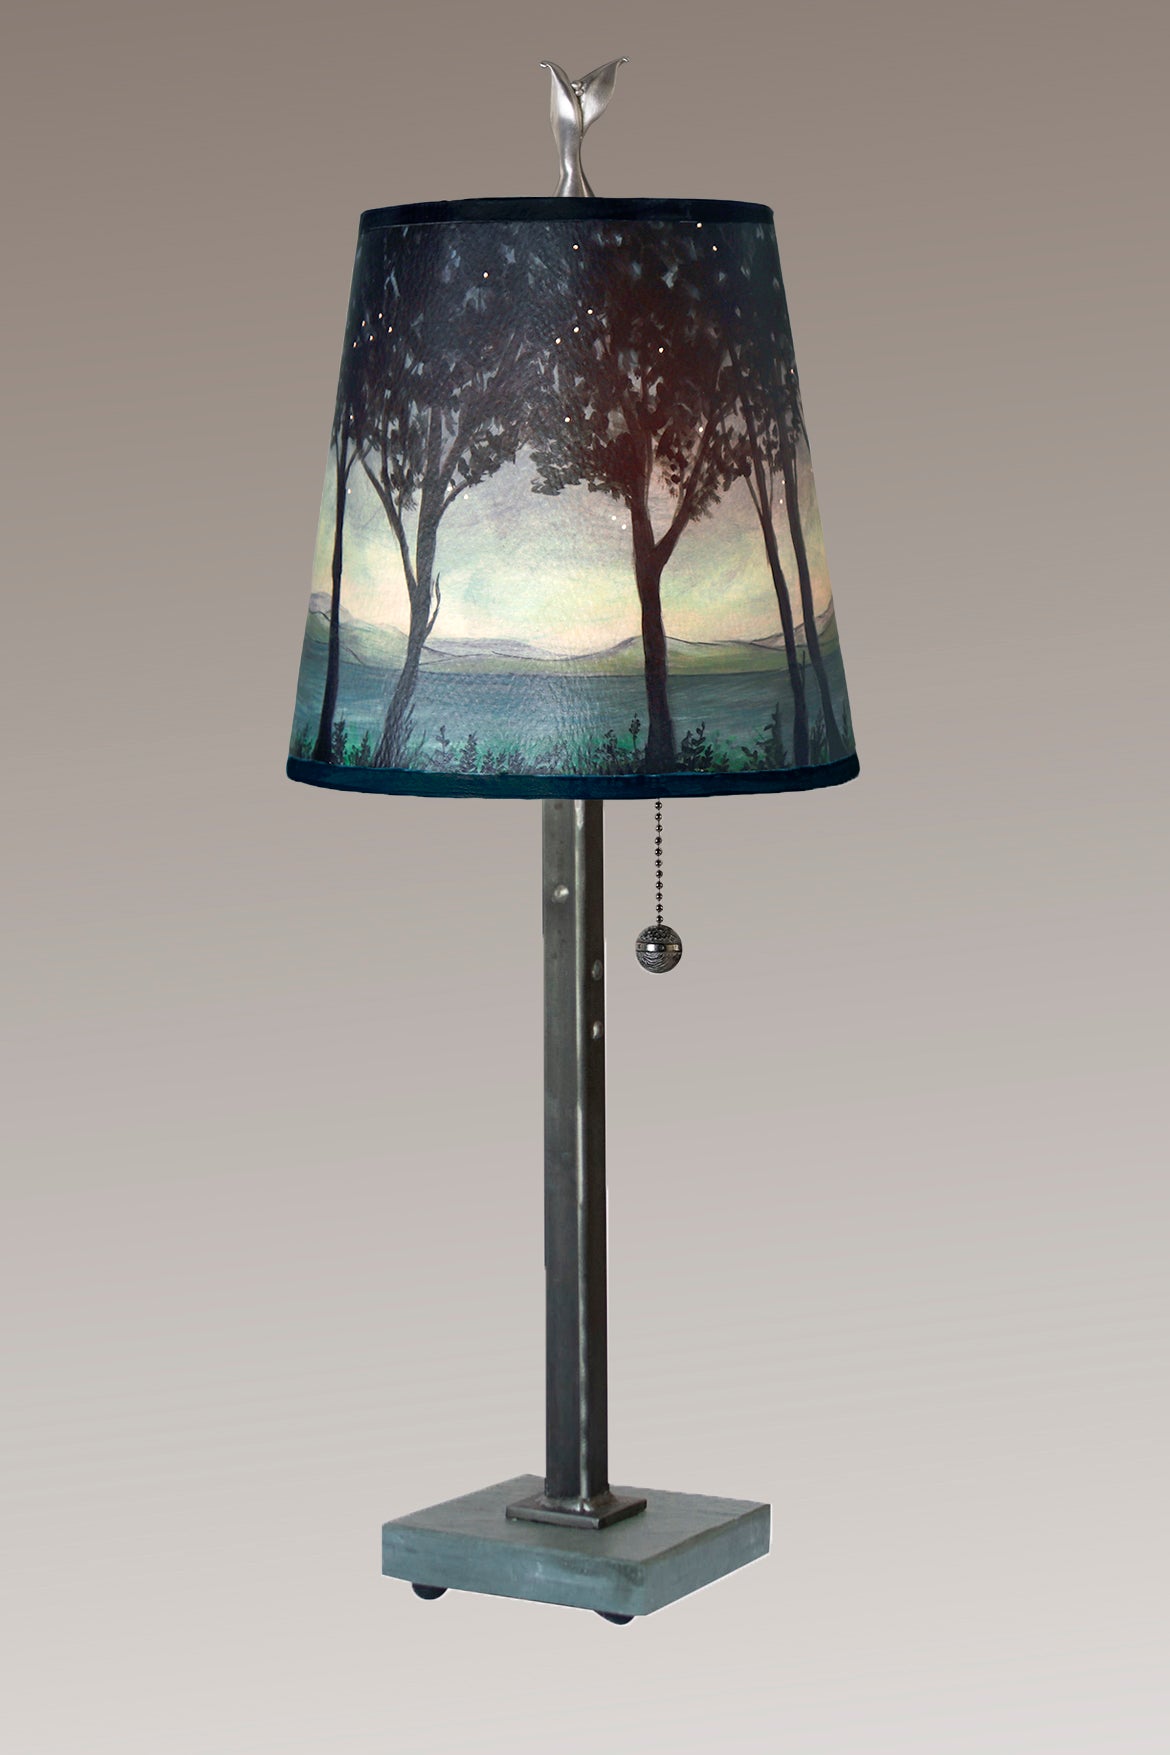 Janna Ugone &amp; Co Table Lamps Steel Table Lamp with Small Drum Shade in Twilight